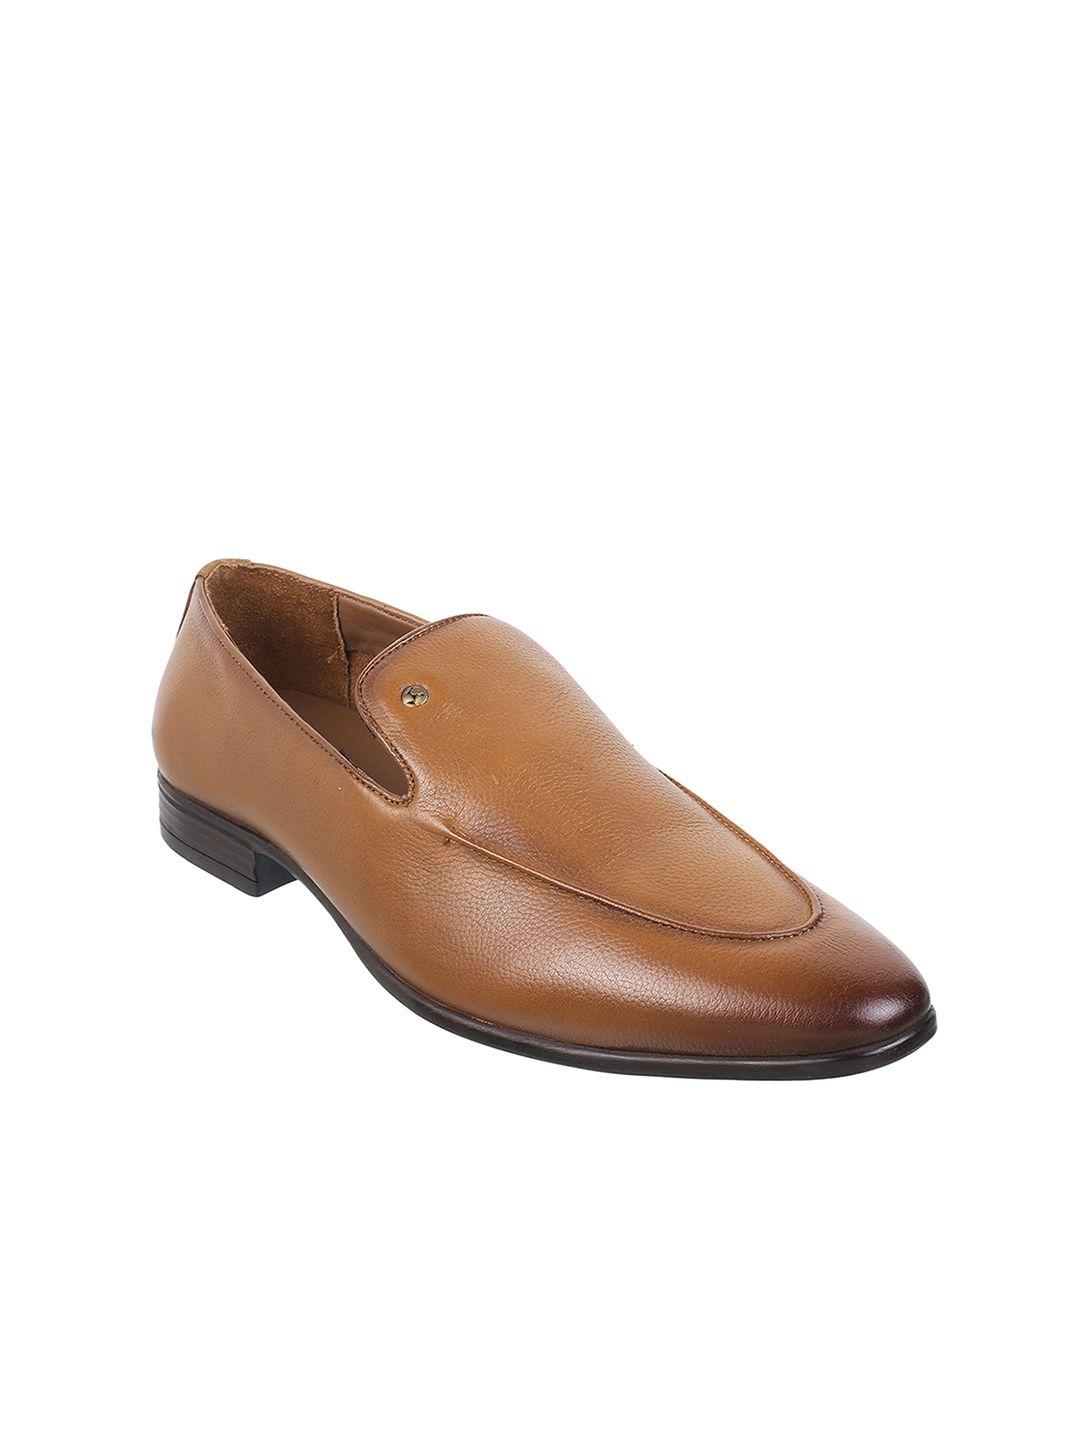 mochi-men-leather-loafers